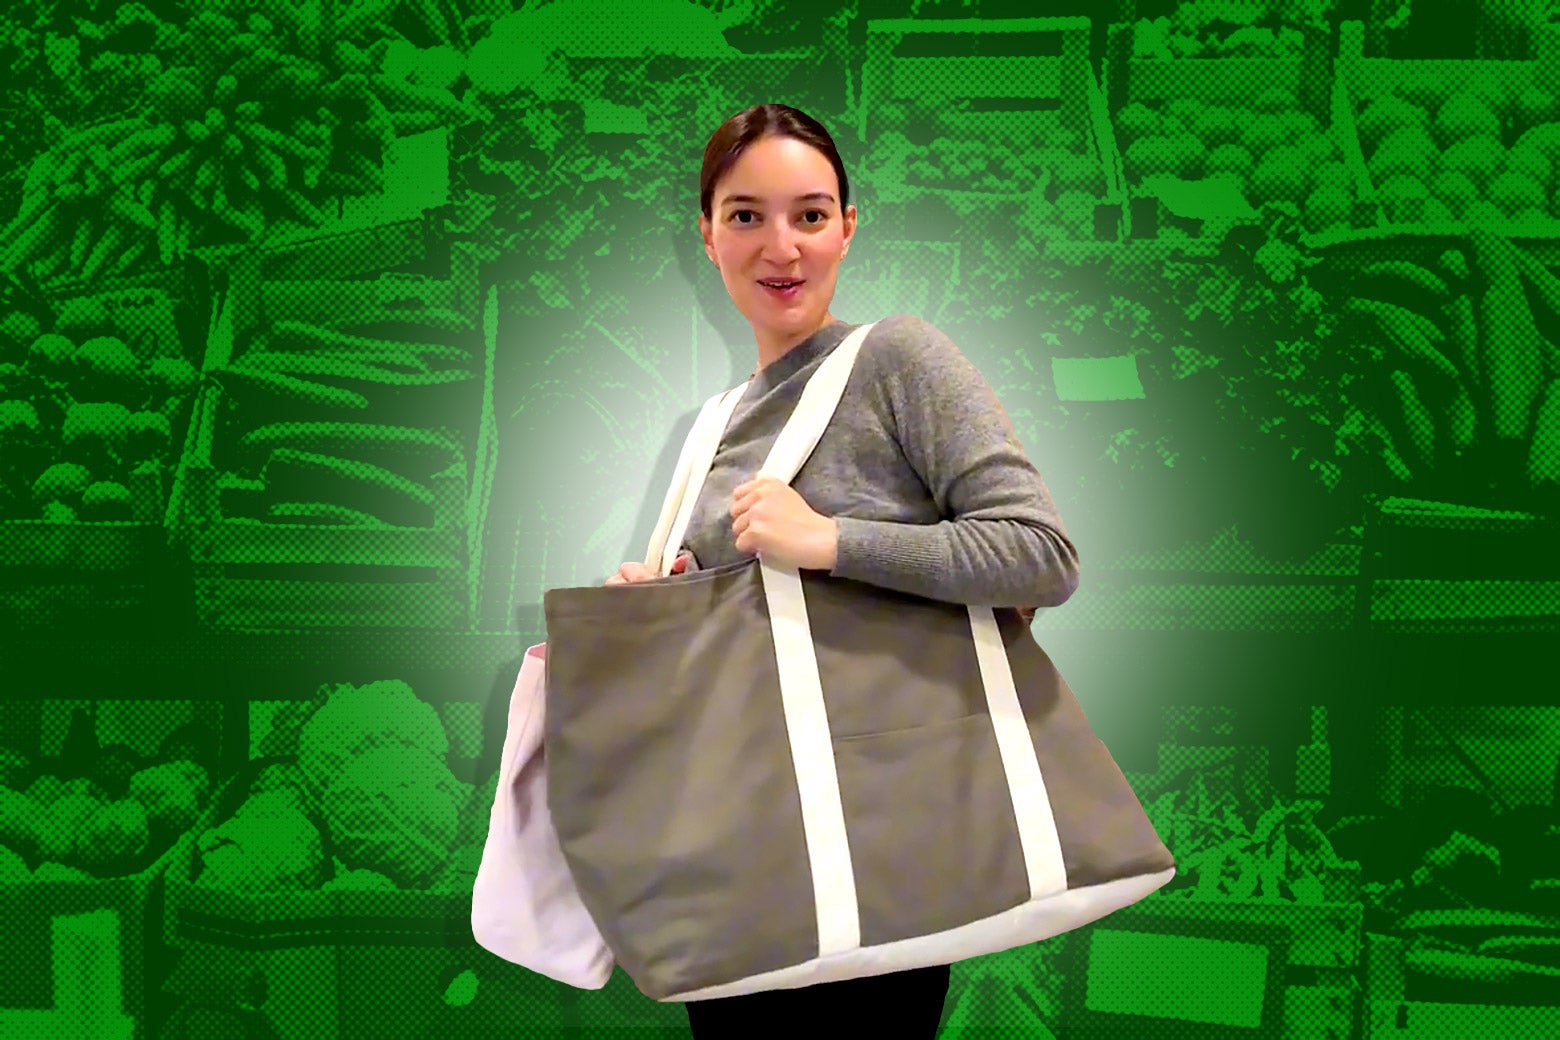 A $120 Tote Bag Has Galvanized the Internet. Everyone Is Thinking About It All Wrong. Jenny G. Zhang